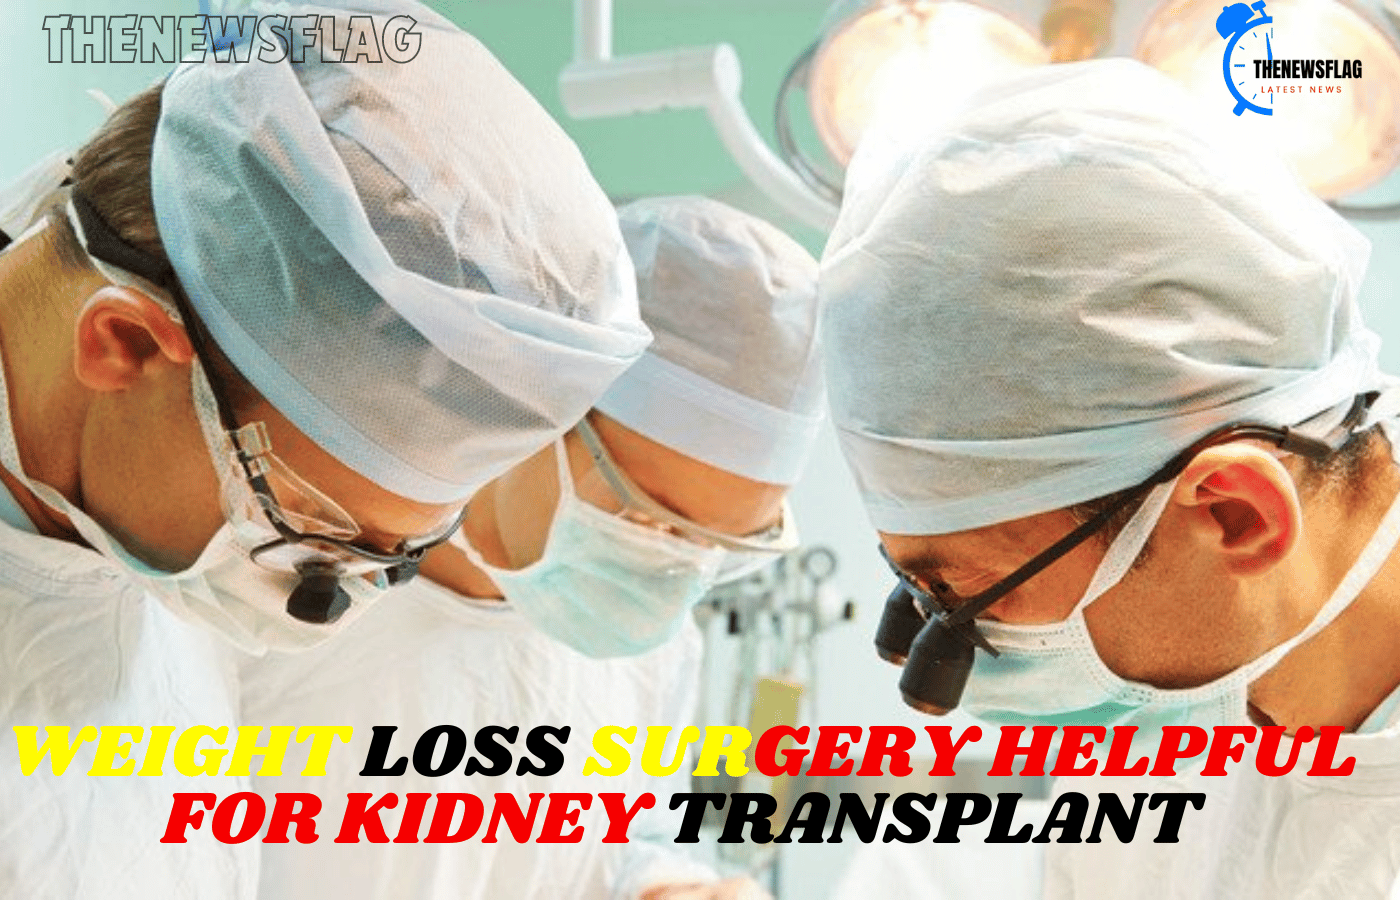 Surgery to reduce weight is beneficial for kidney transplant recipients who are obese